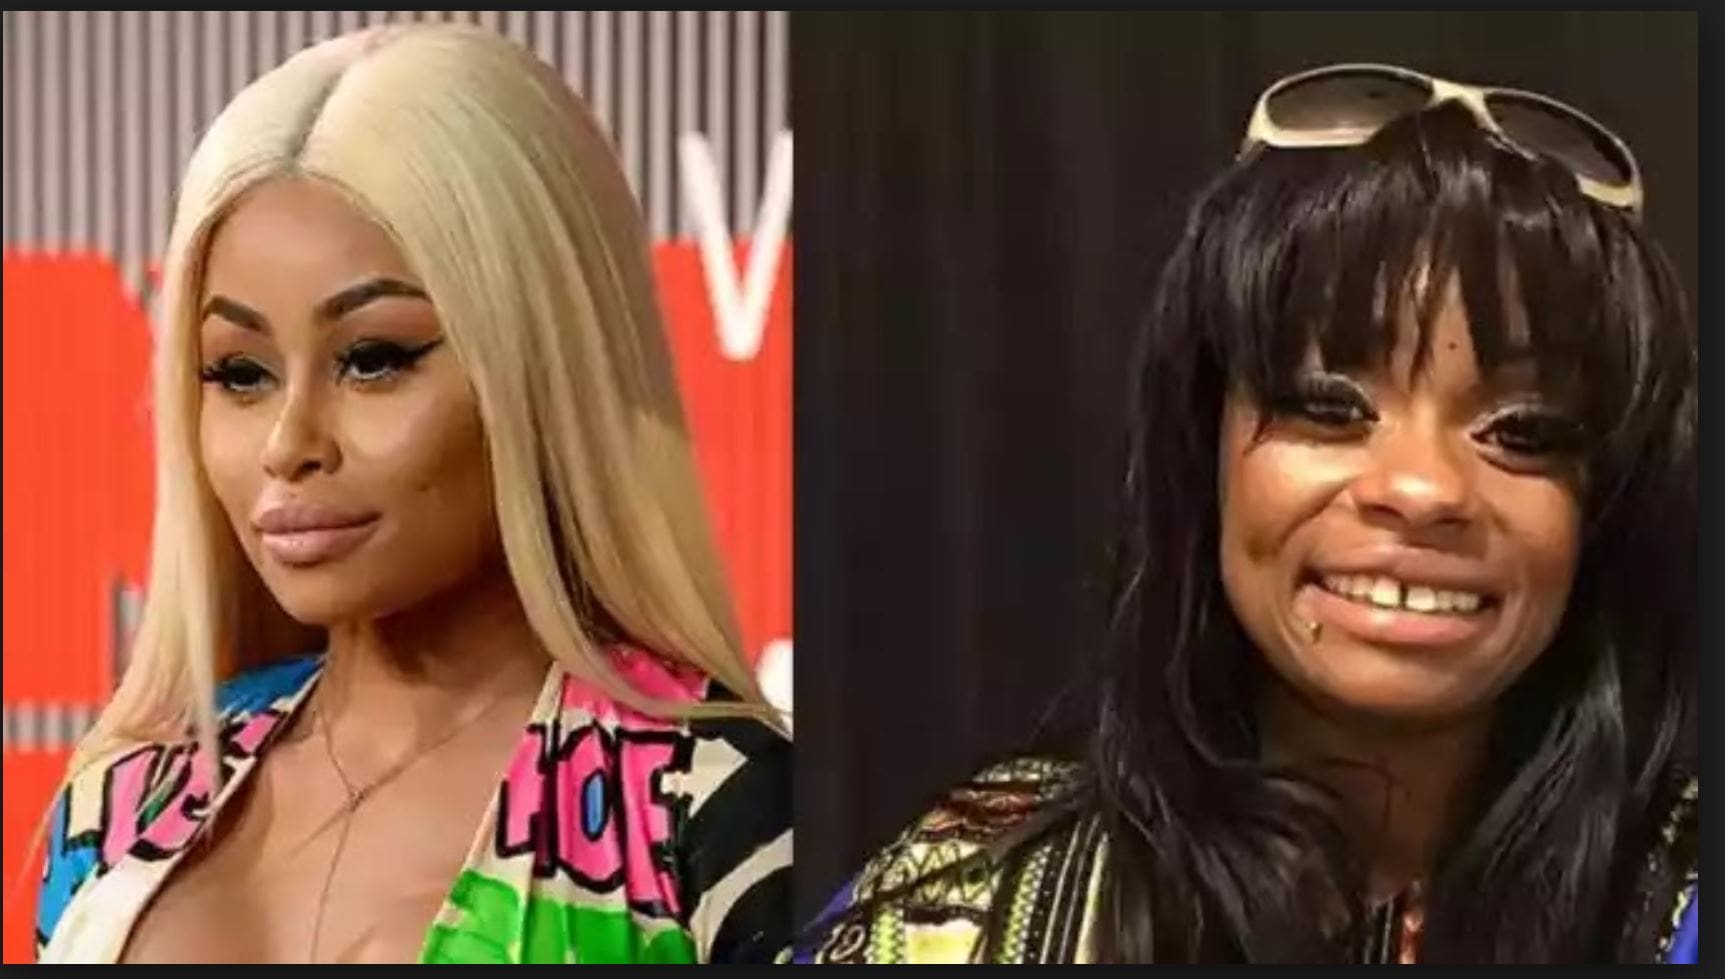 Blac Chyna Hugs Her Mom And Says She Loves Her And Fans Ask Her To Keep Their Relationship Away From The Public Eye